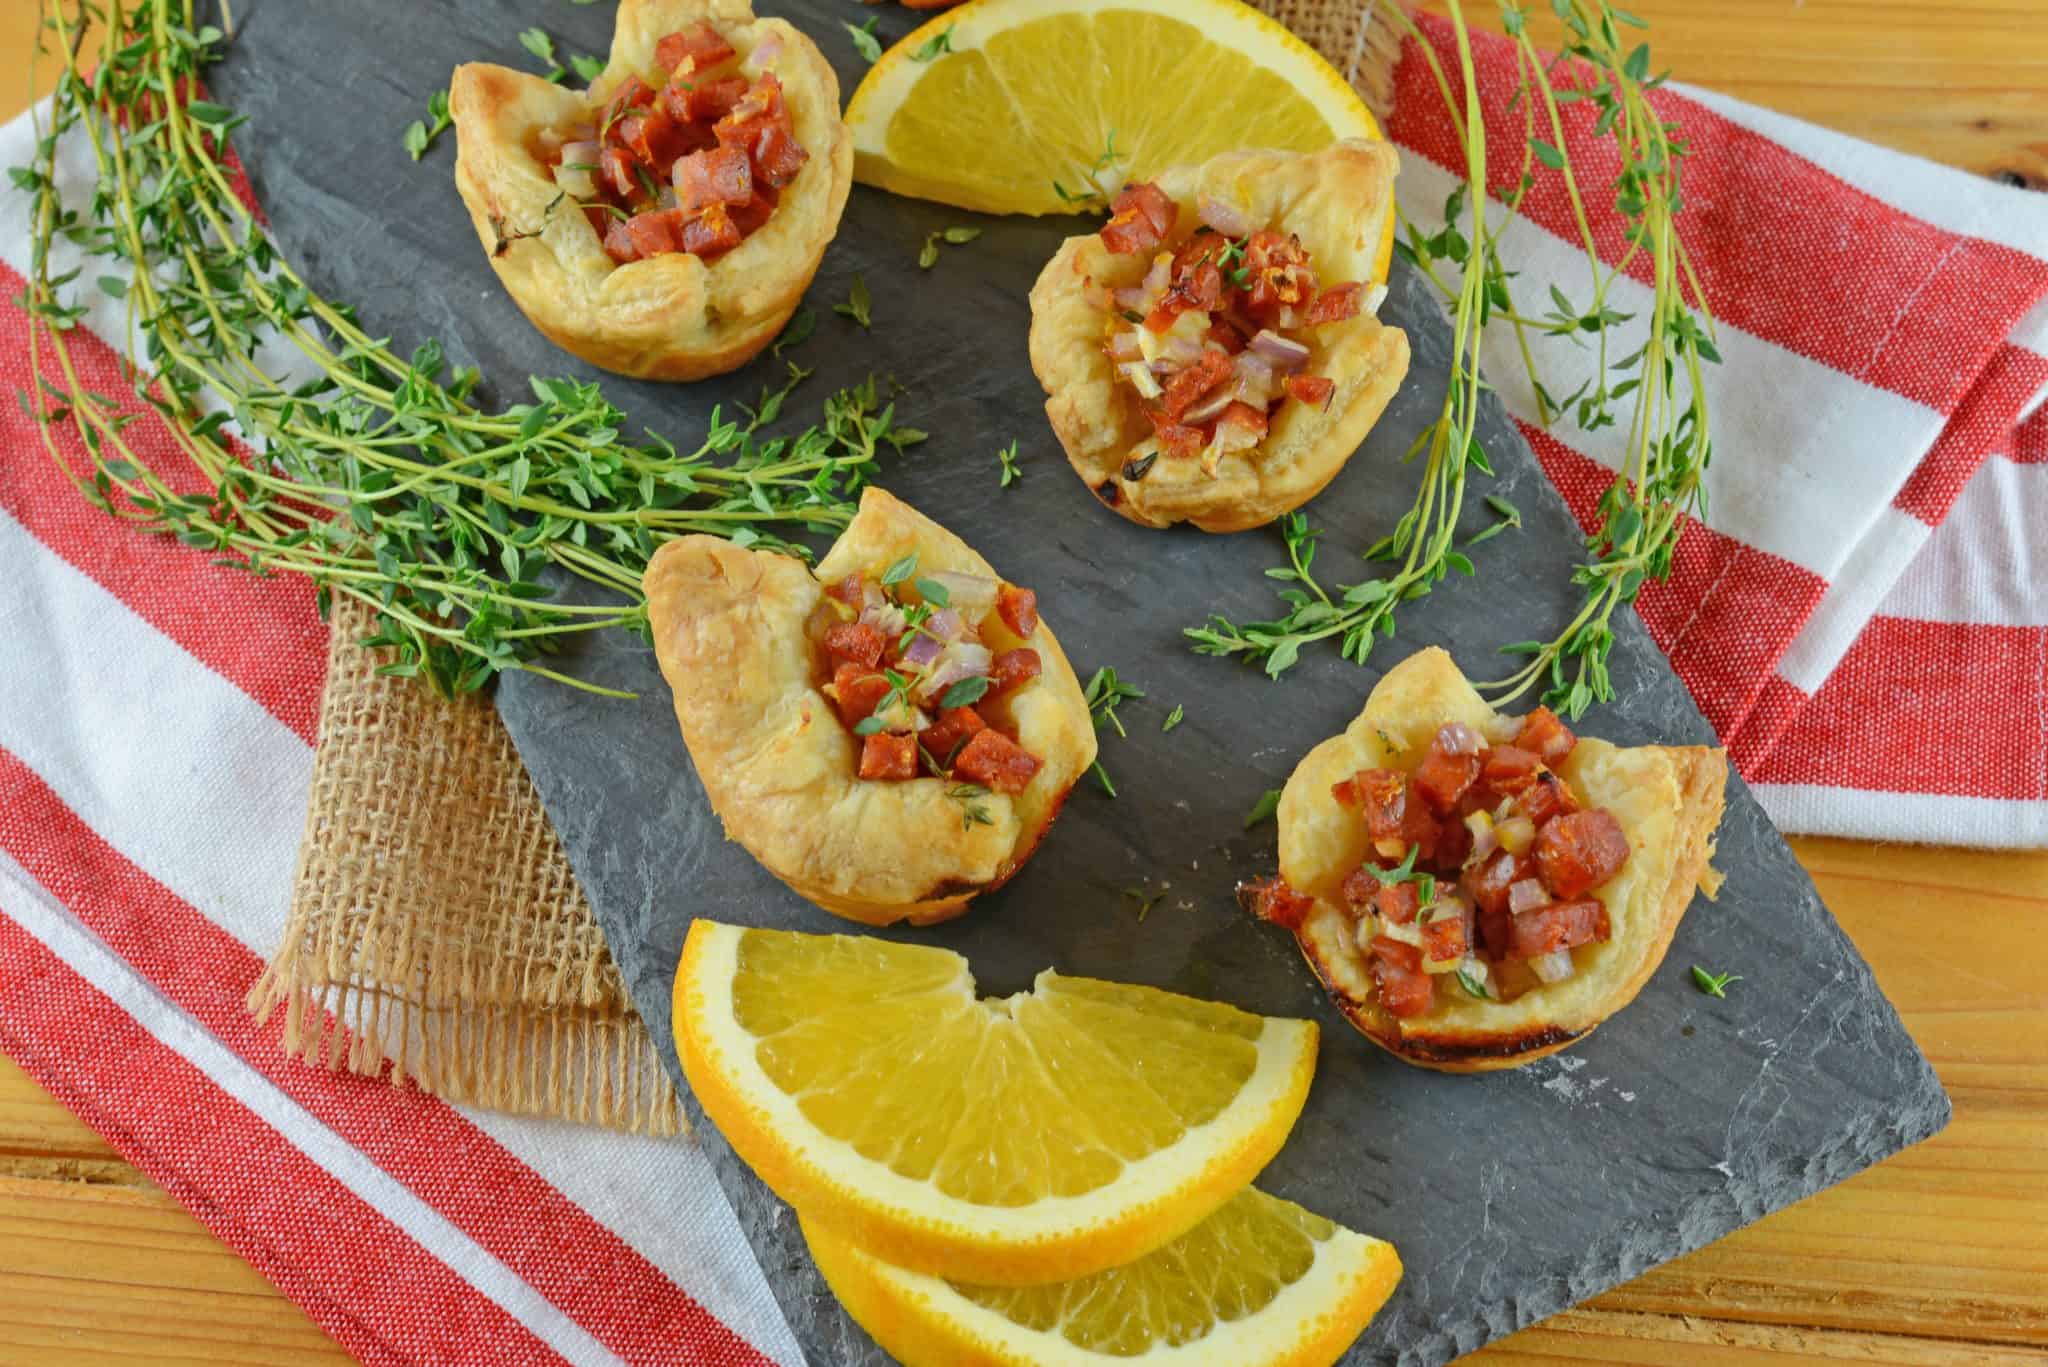 Citrus Sausage Tartlets are an easy appetizer perfect for a fancy party, casual get together or office potluck. They only take 7 ingredients and 15 minutes of prep!